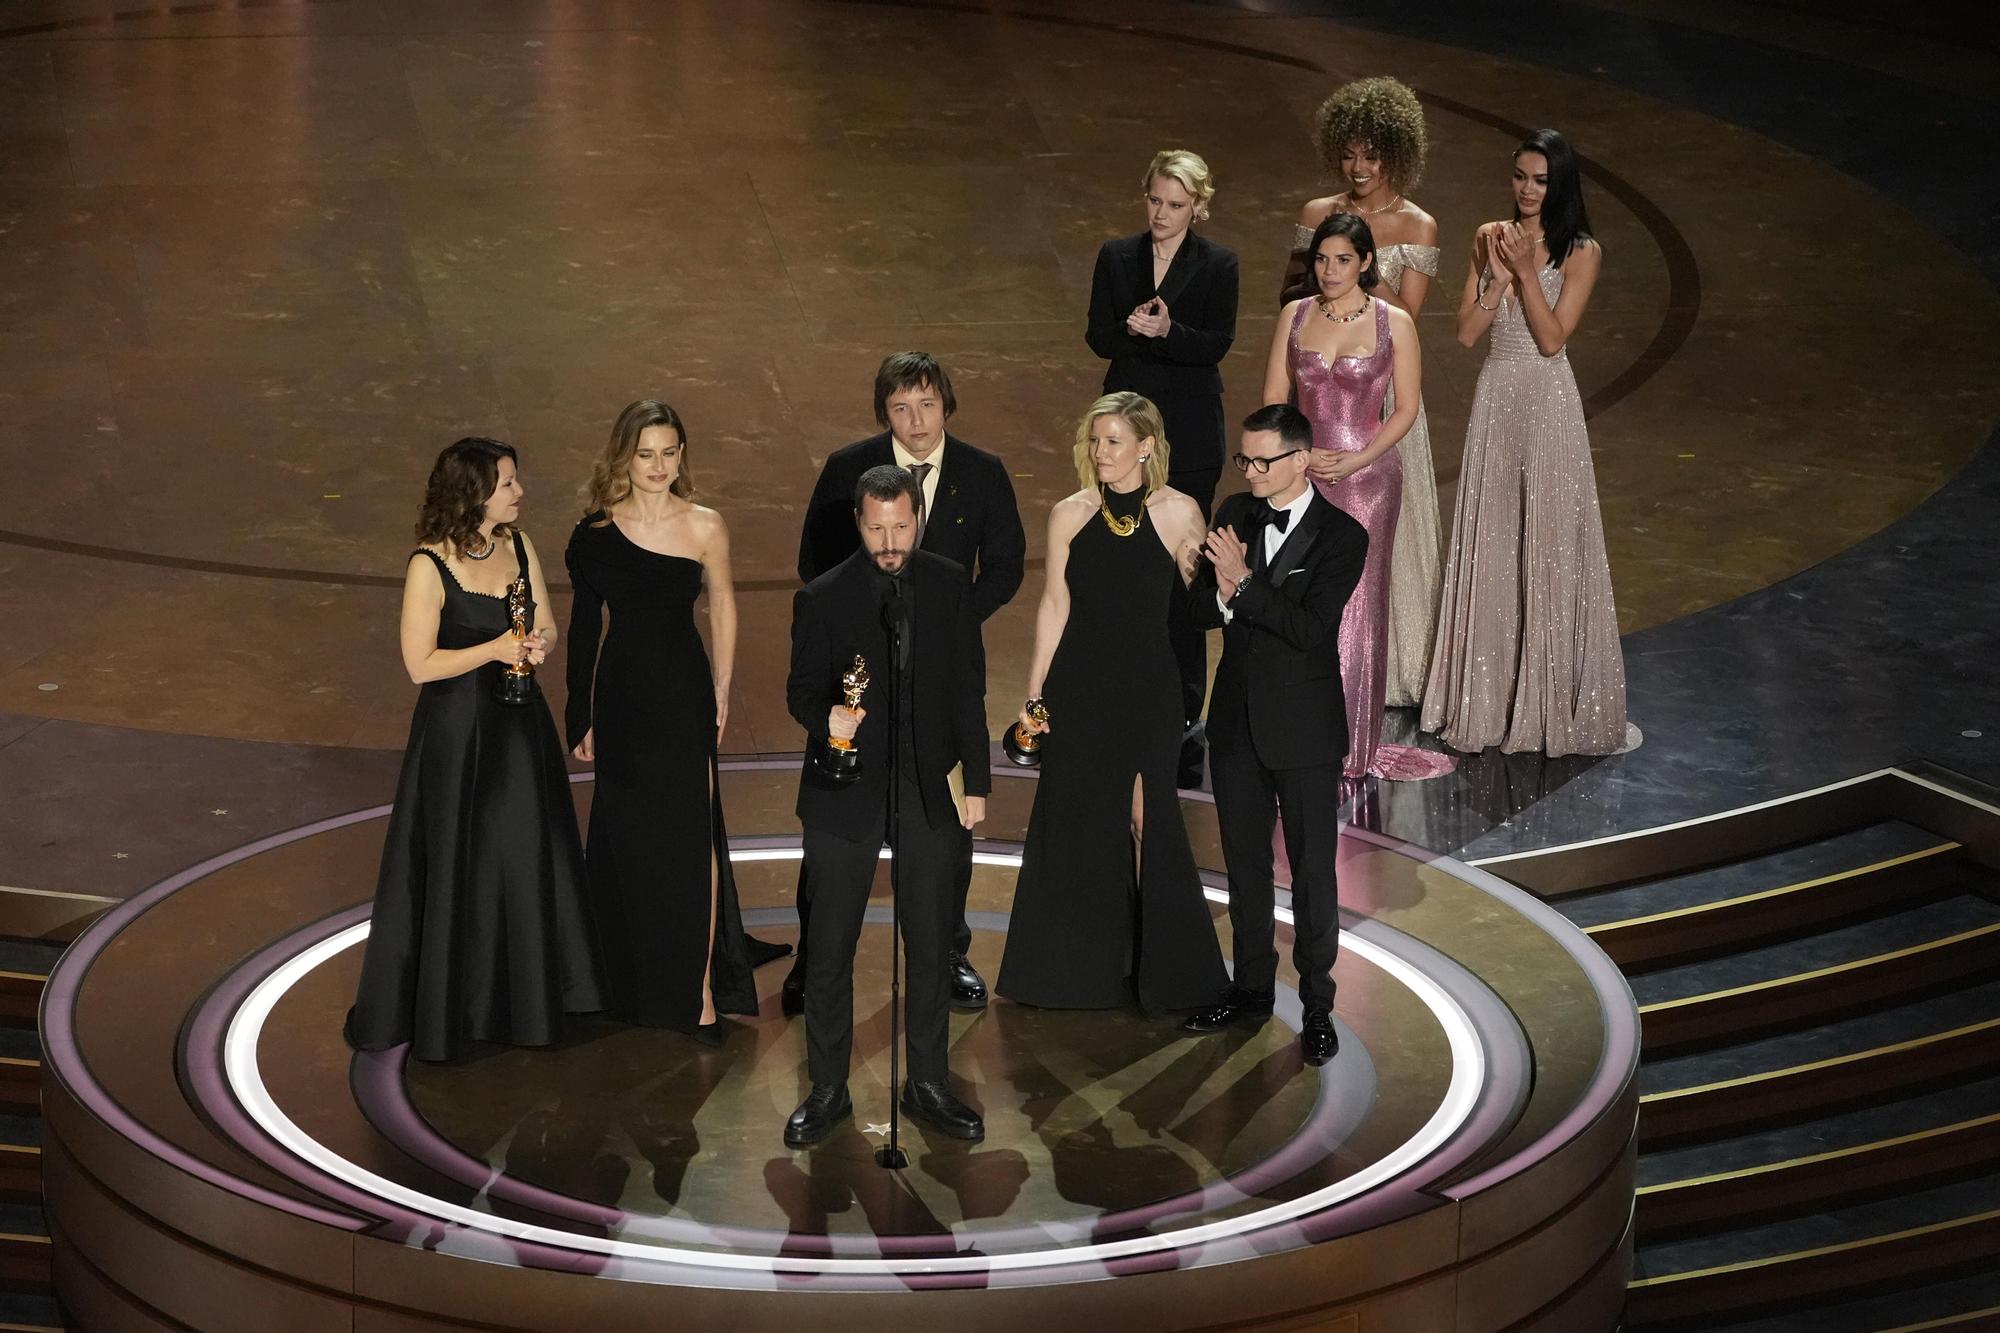 Raney Aronson-Rath, from left, Vasilisa Stepanenko, Mstyslav Chernov, Evgeniy Maloletka, Michelle Mizner, and Derl McCrudden accept the award for best documentary feature film for "20 Days in Mariupol" during the Oscars on Sunday, March 10, 2024, at the Dolby Theatre in Los Angeles. Kate McKinnon and America Ferrera look on from right.(AP Photo/Chris Pizzello) Associated Press/LaPresse Only Italy and Spain / EDITORIAL USE ONLY/ONLY ITALY AND SPAIN